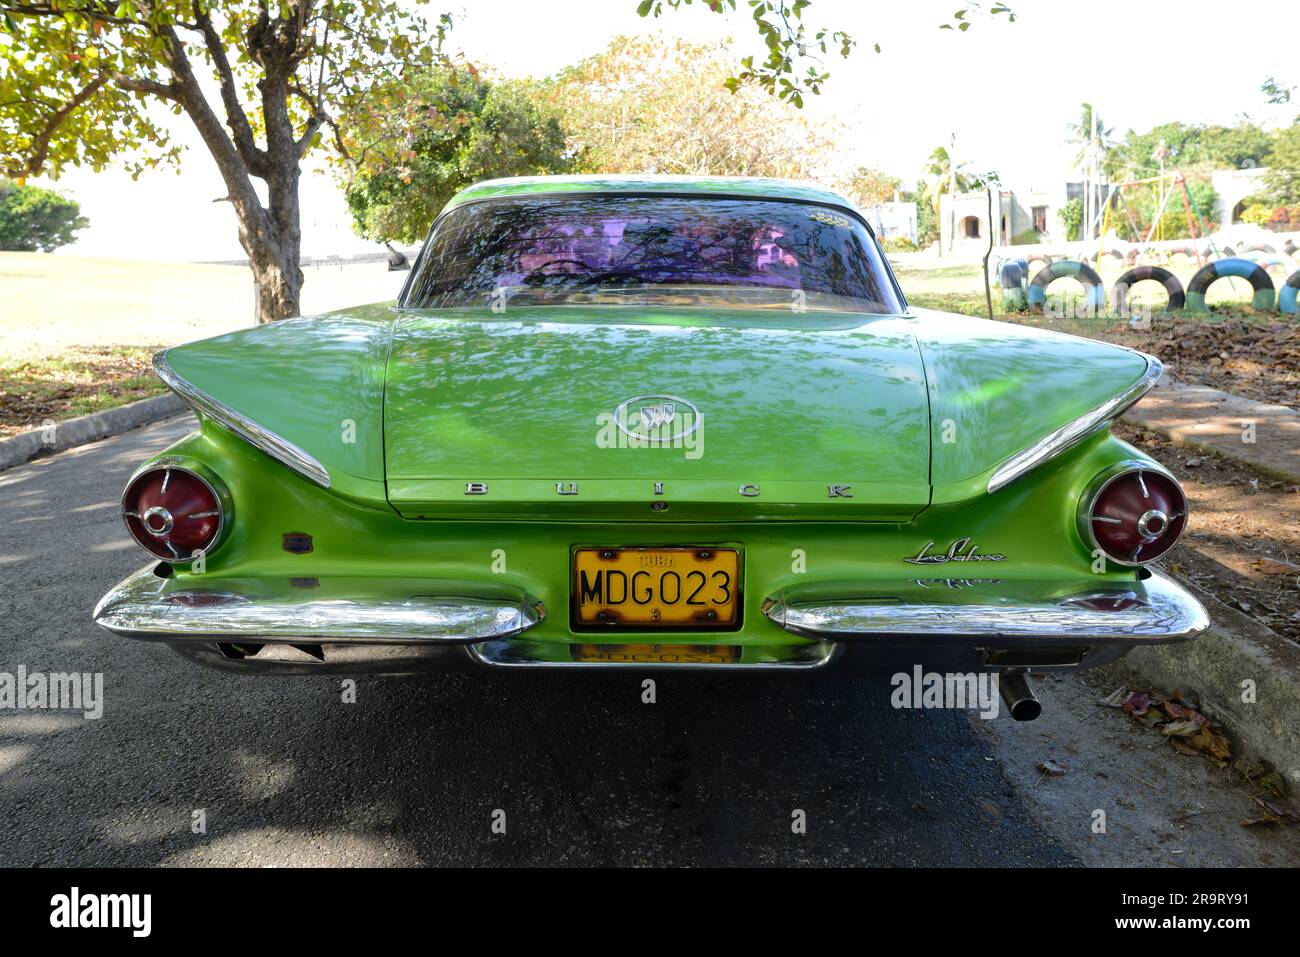 Tail fin of green Buick vintage car Stock Photo